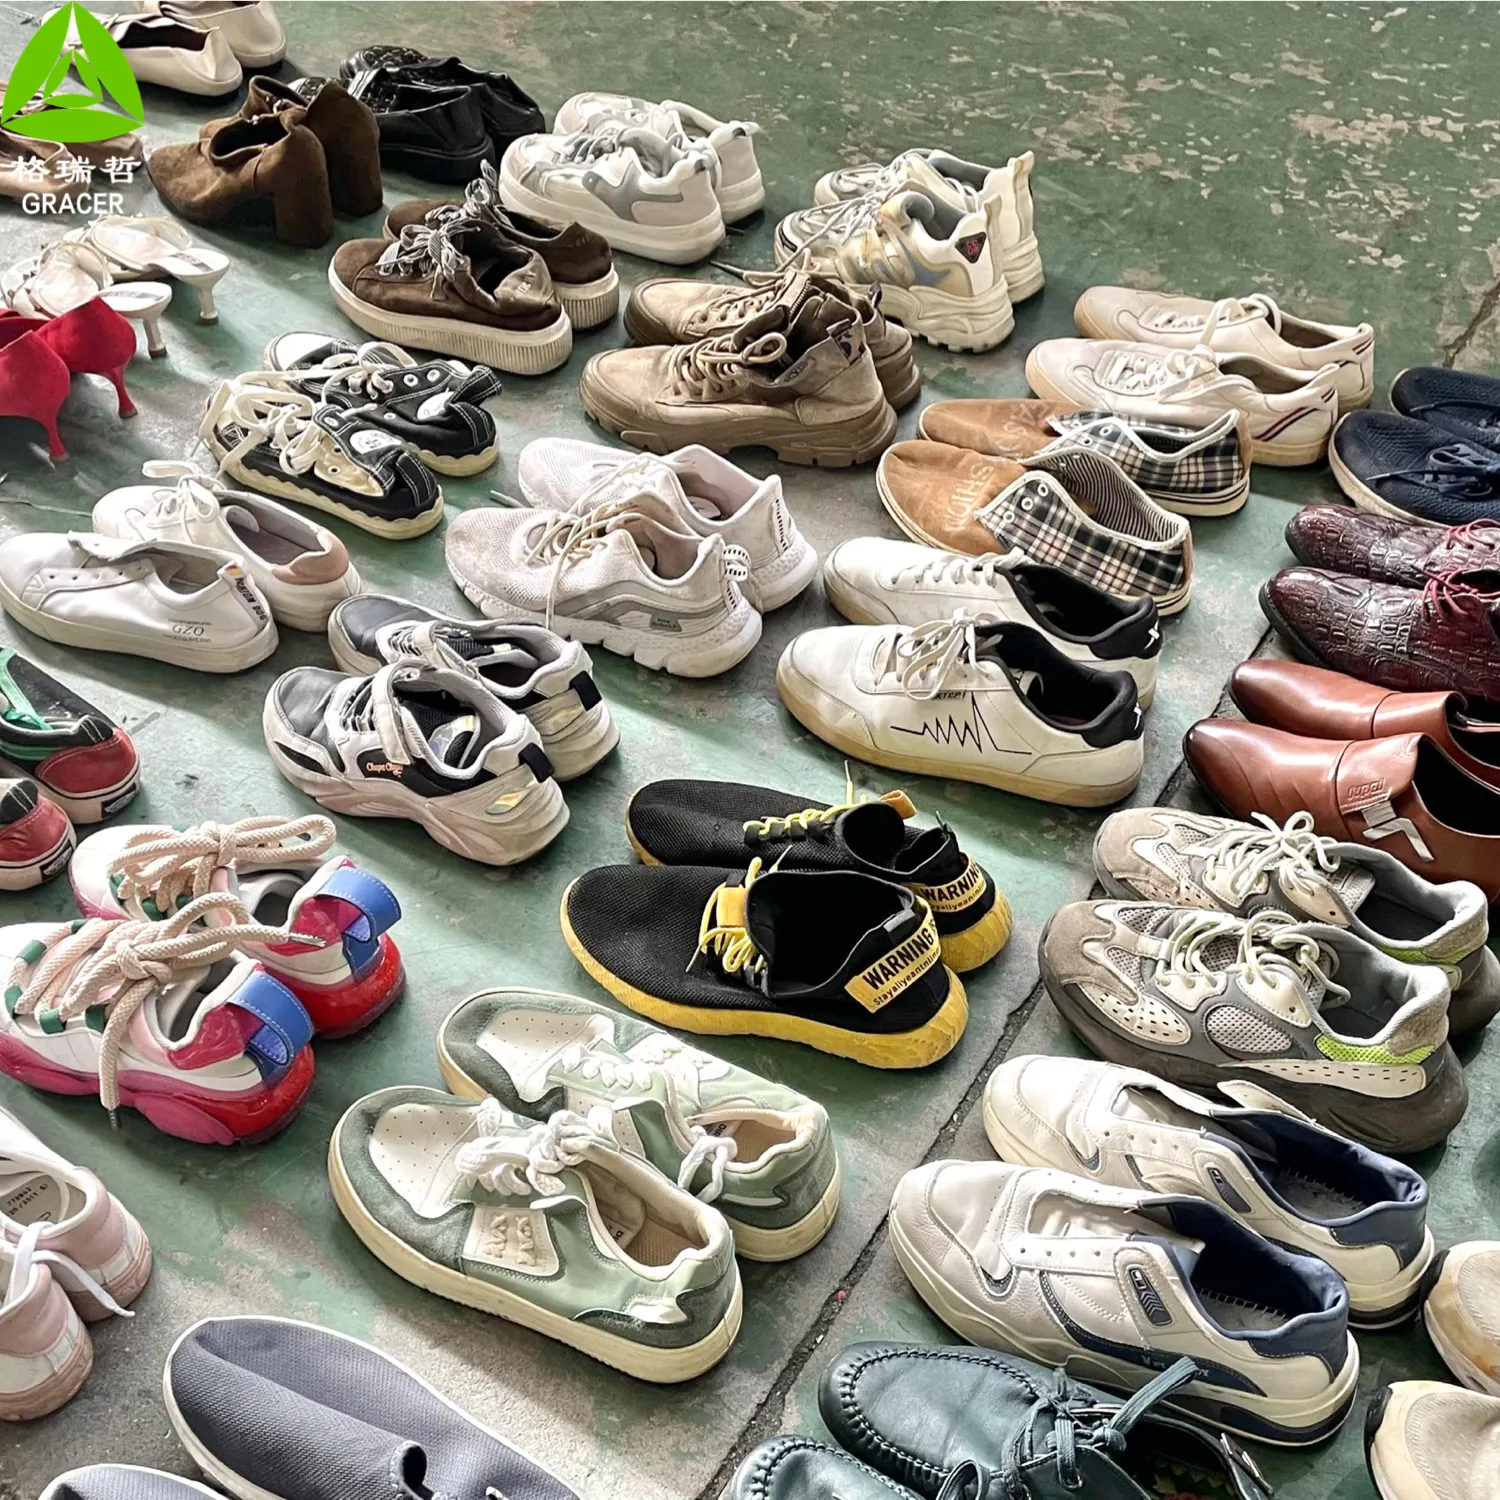 Second Hand Used Clothing And Shoes Mixed Used Shoes Wholesale In UK